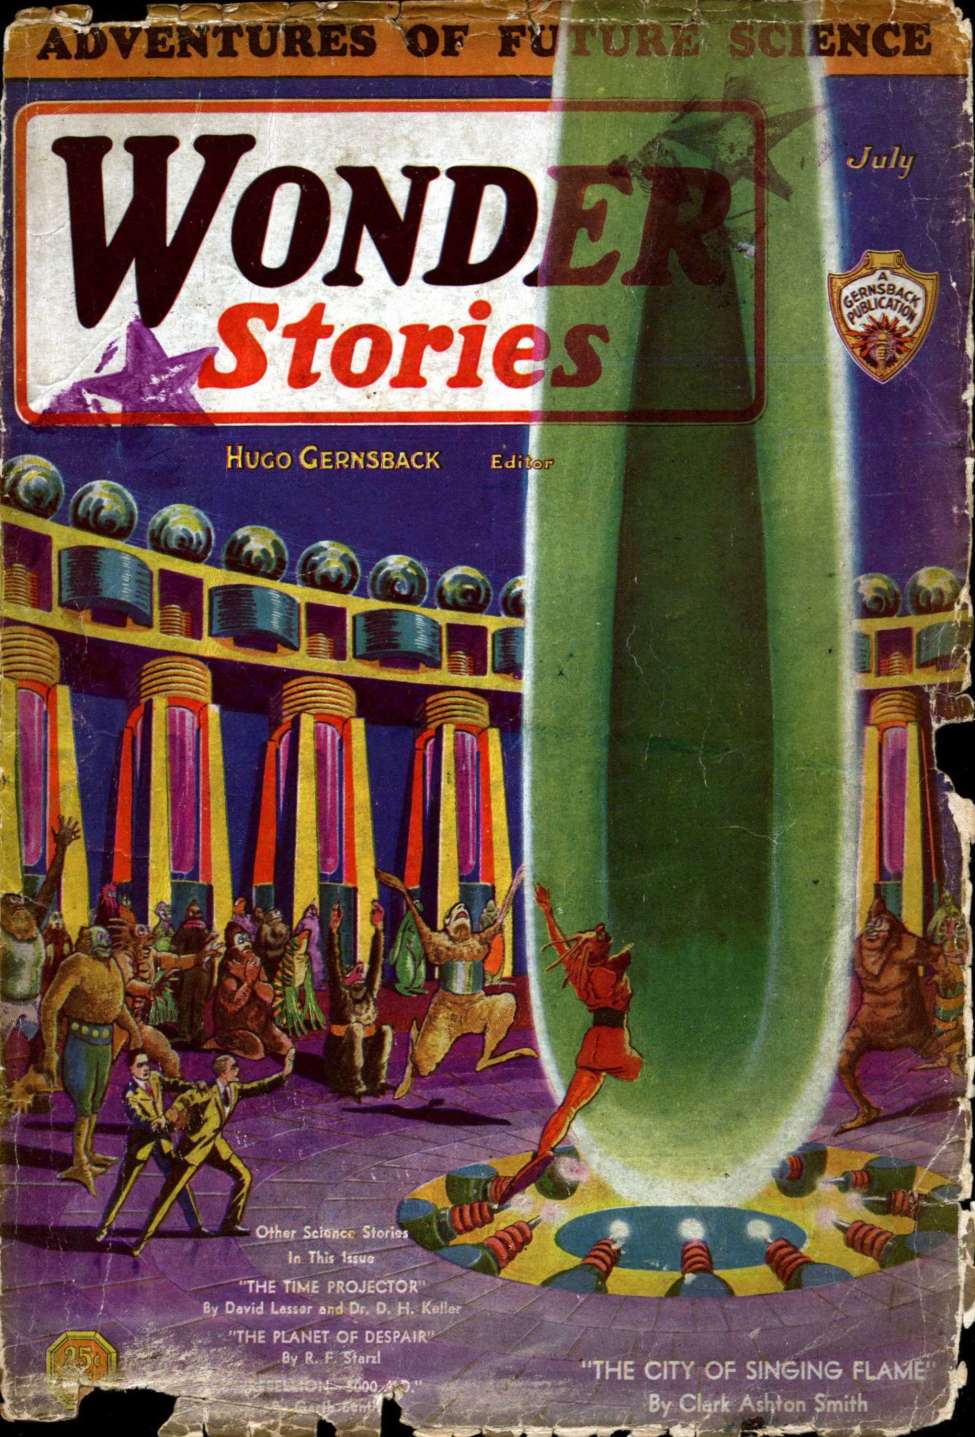 Book Cover For Wonder Stories v3 2 - The Time Projector - David Lasser